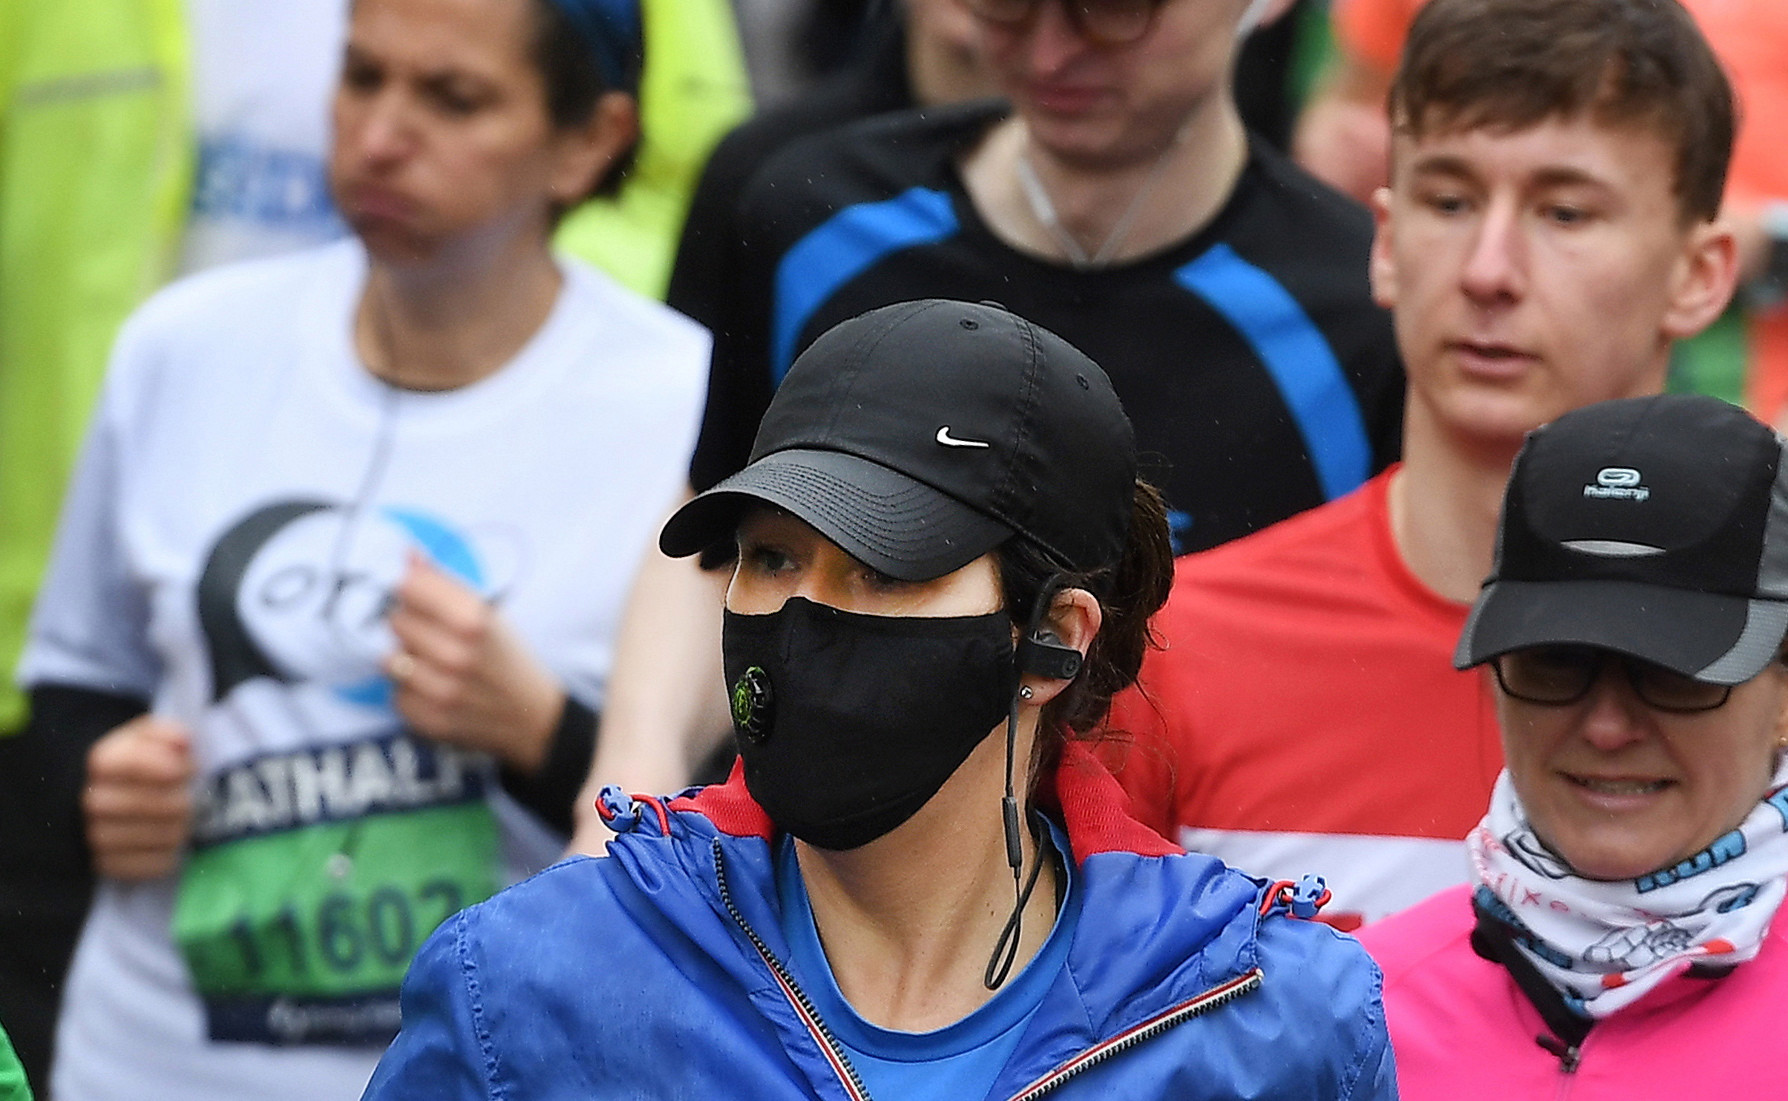  One concerned Bath runner wore a mask for the event as thousands packed onto the streets